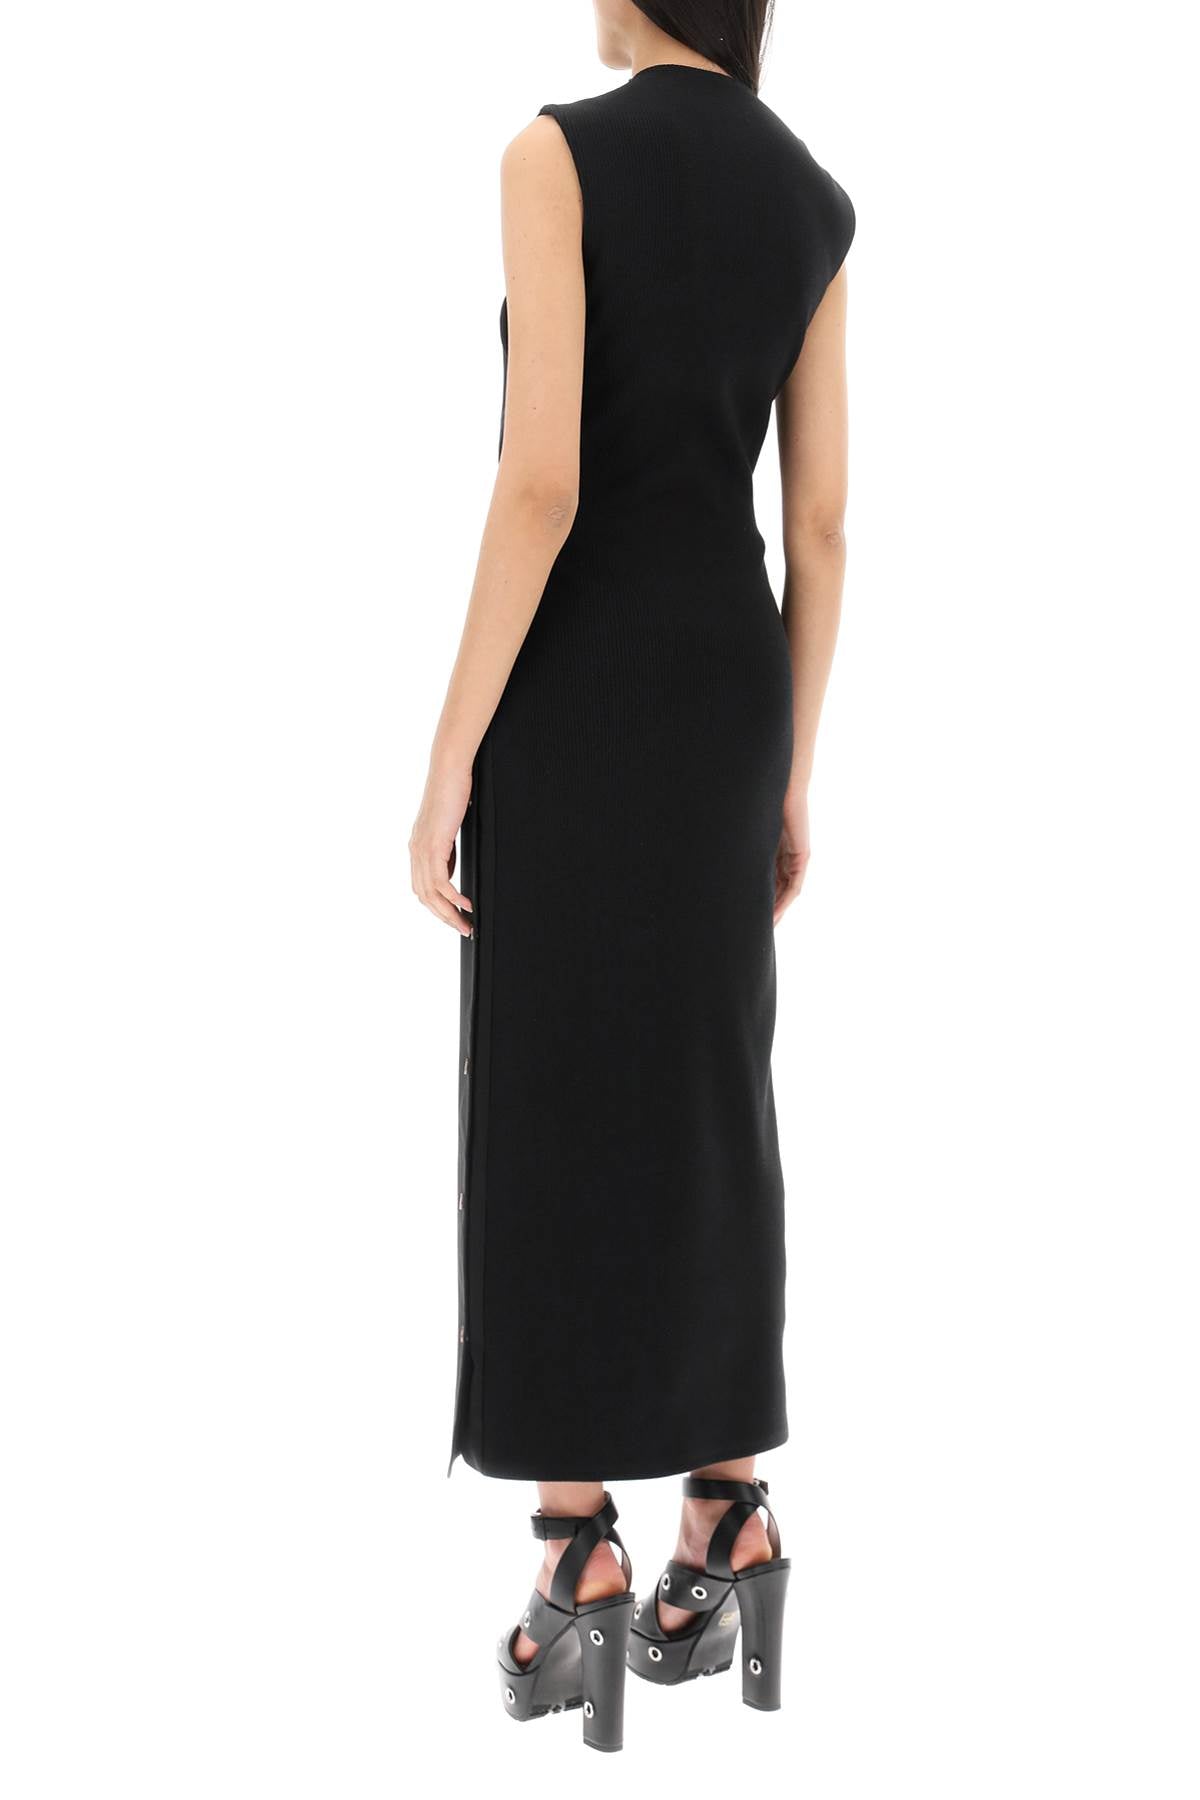 Y project dual material maxi dress with snap panels-2